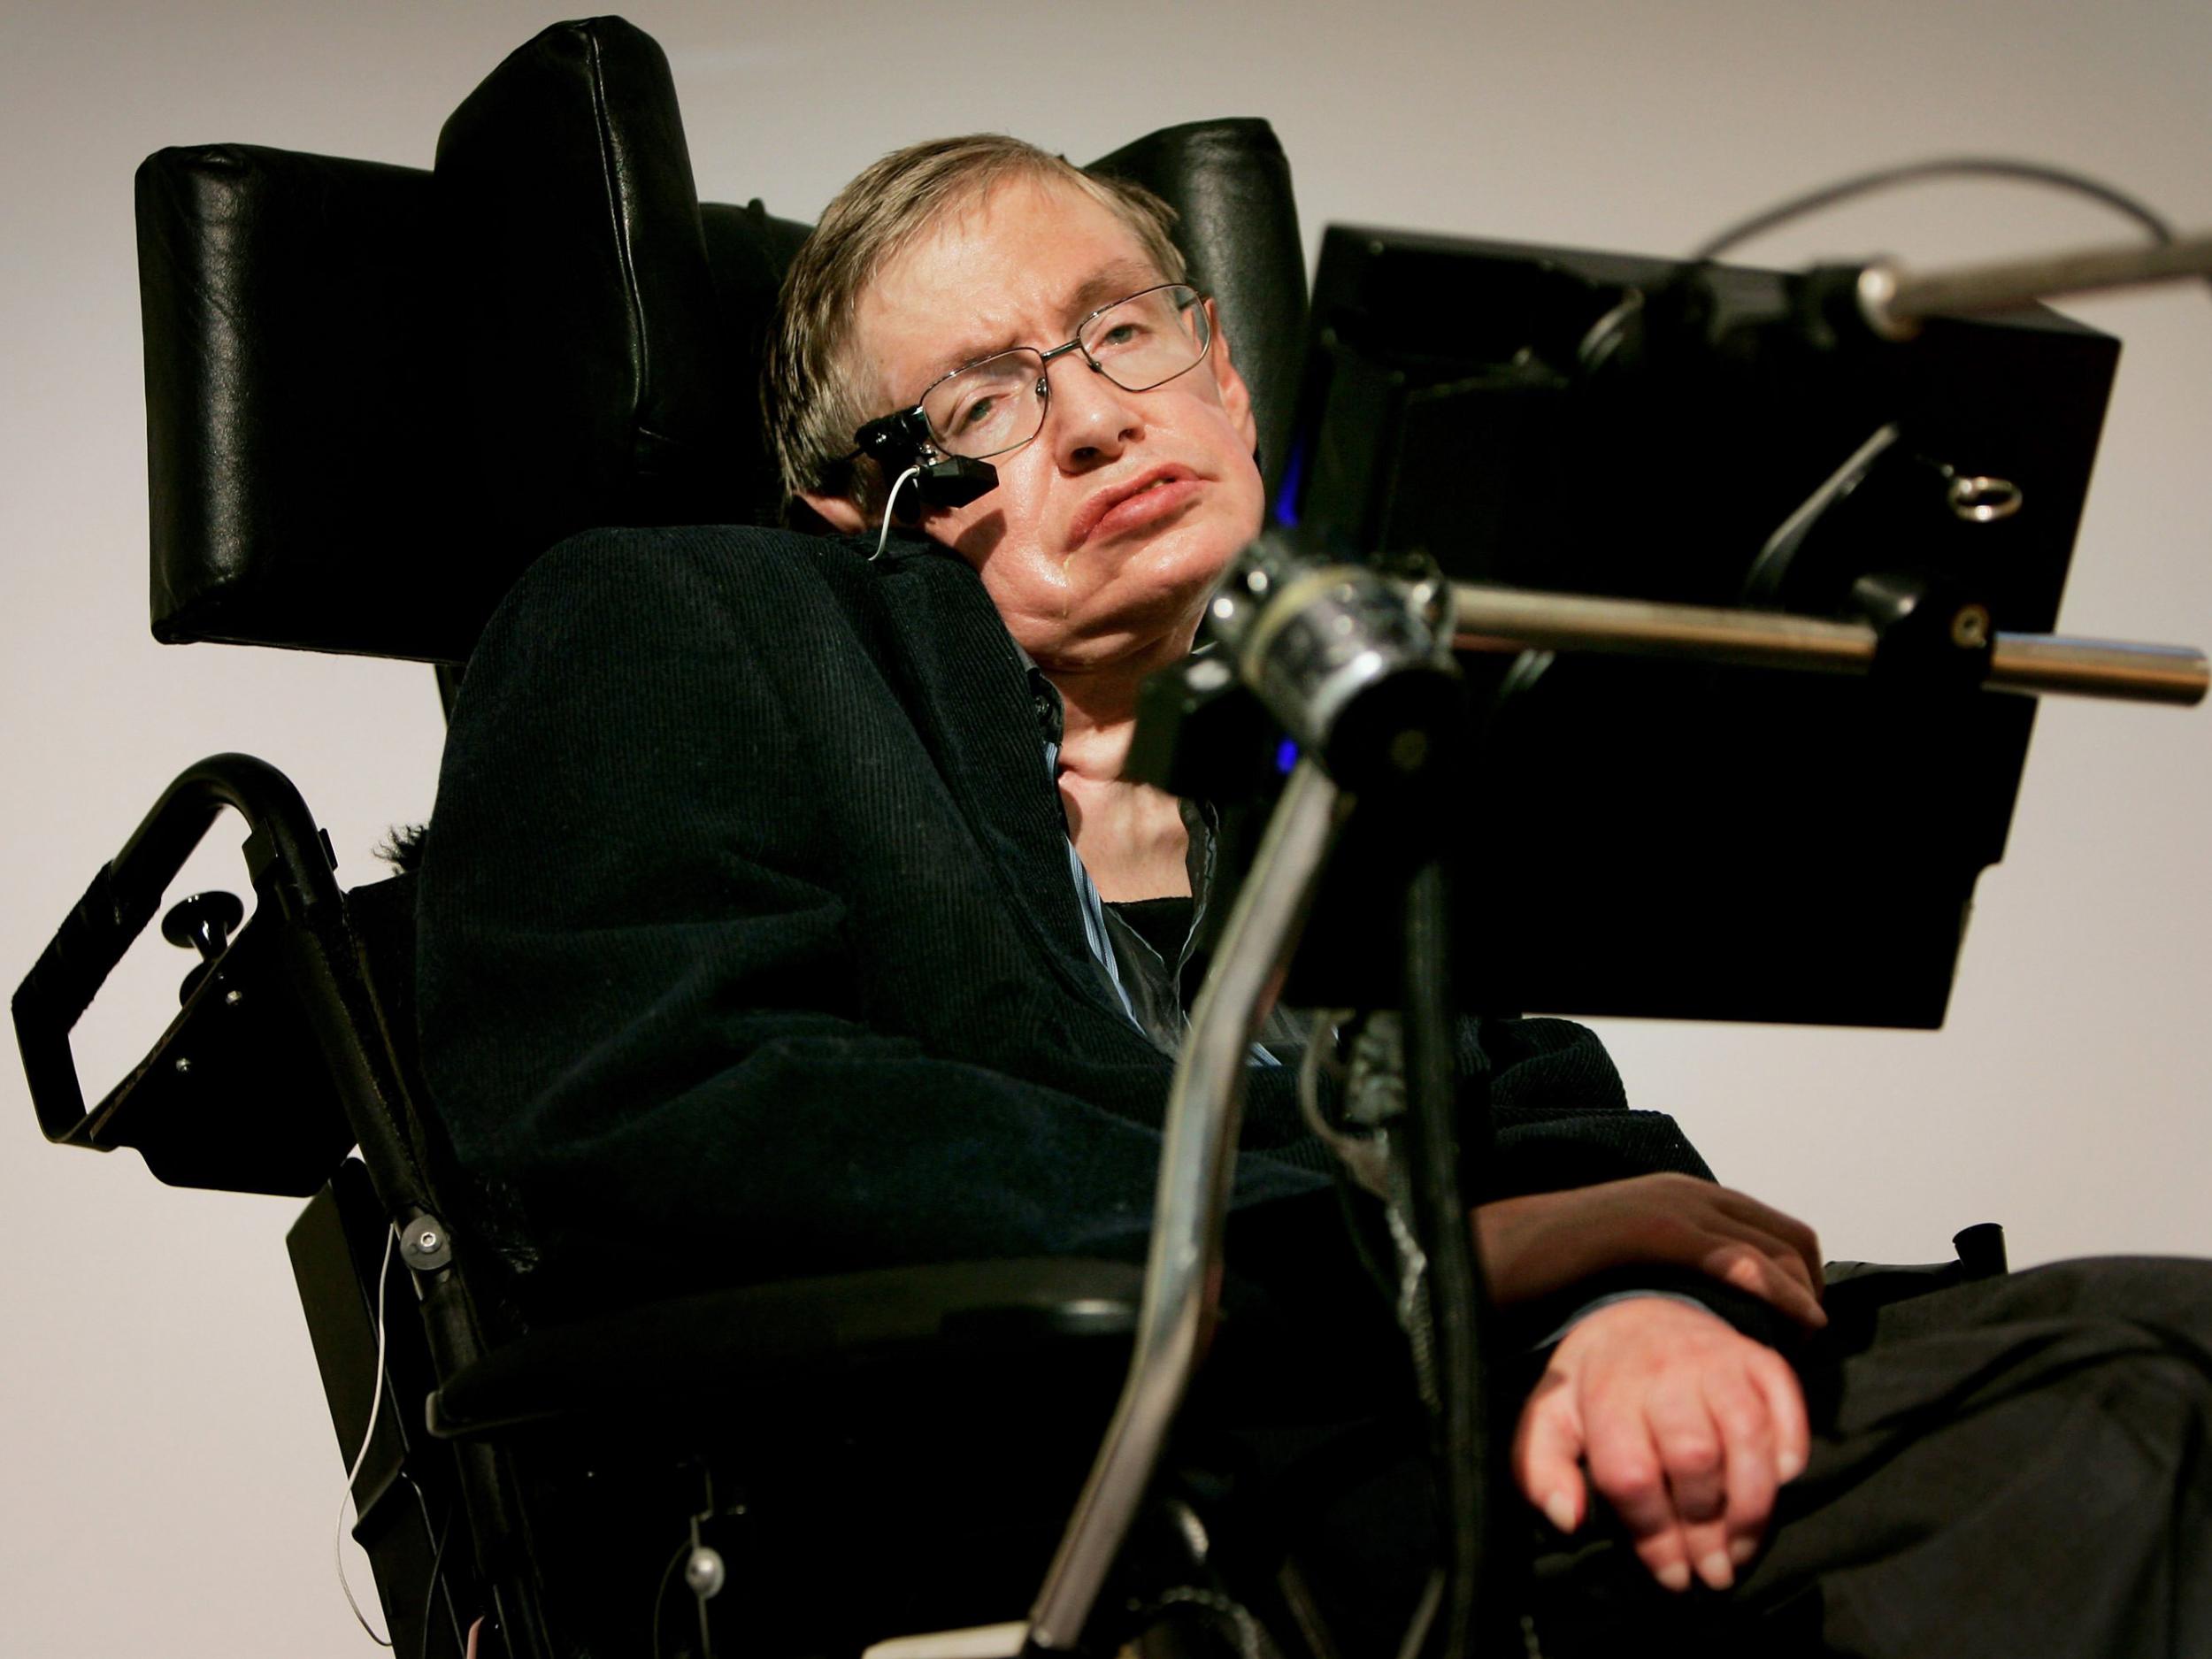 Hawking warned that AI was ‘potentially more dangerous than nukes’